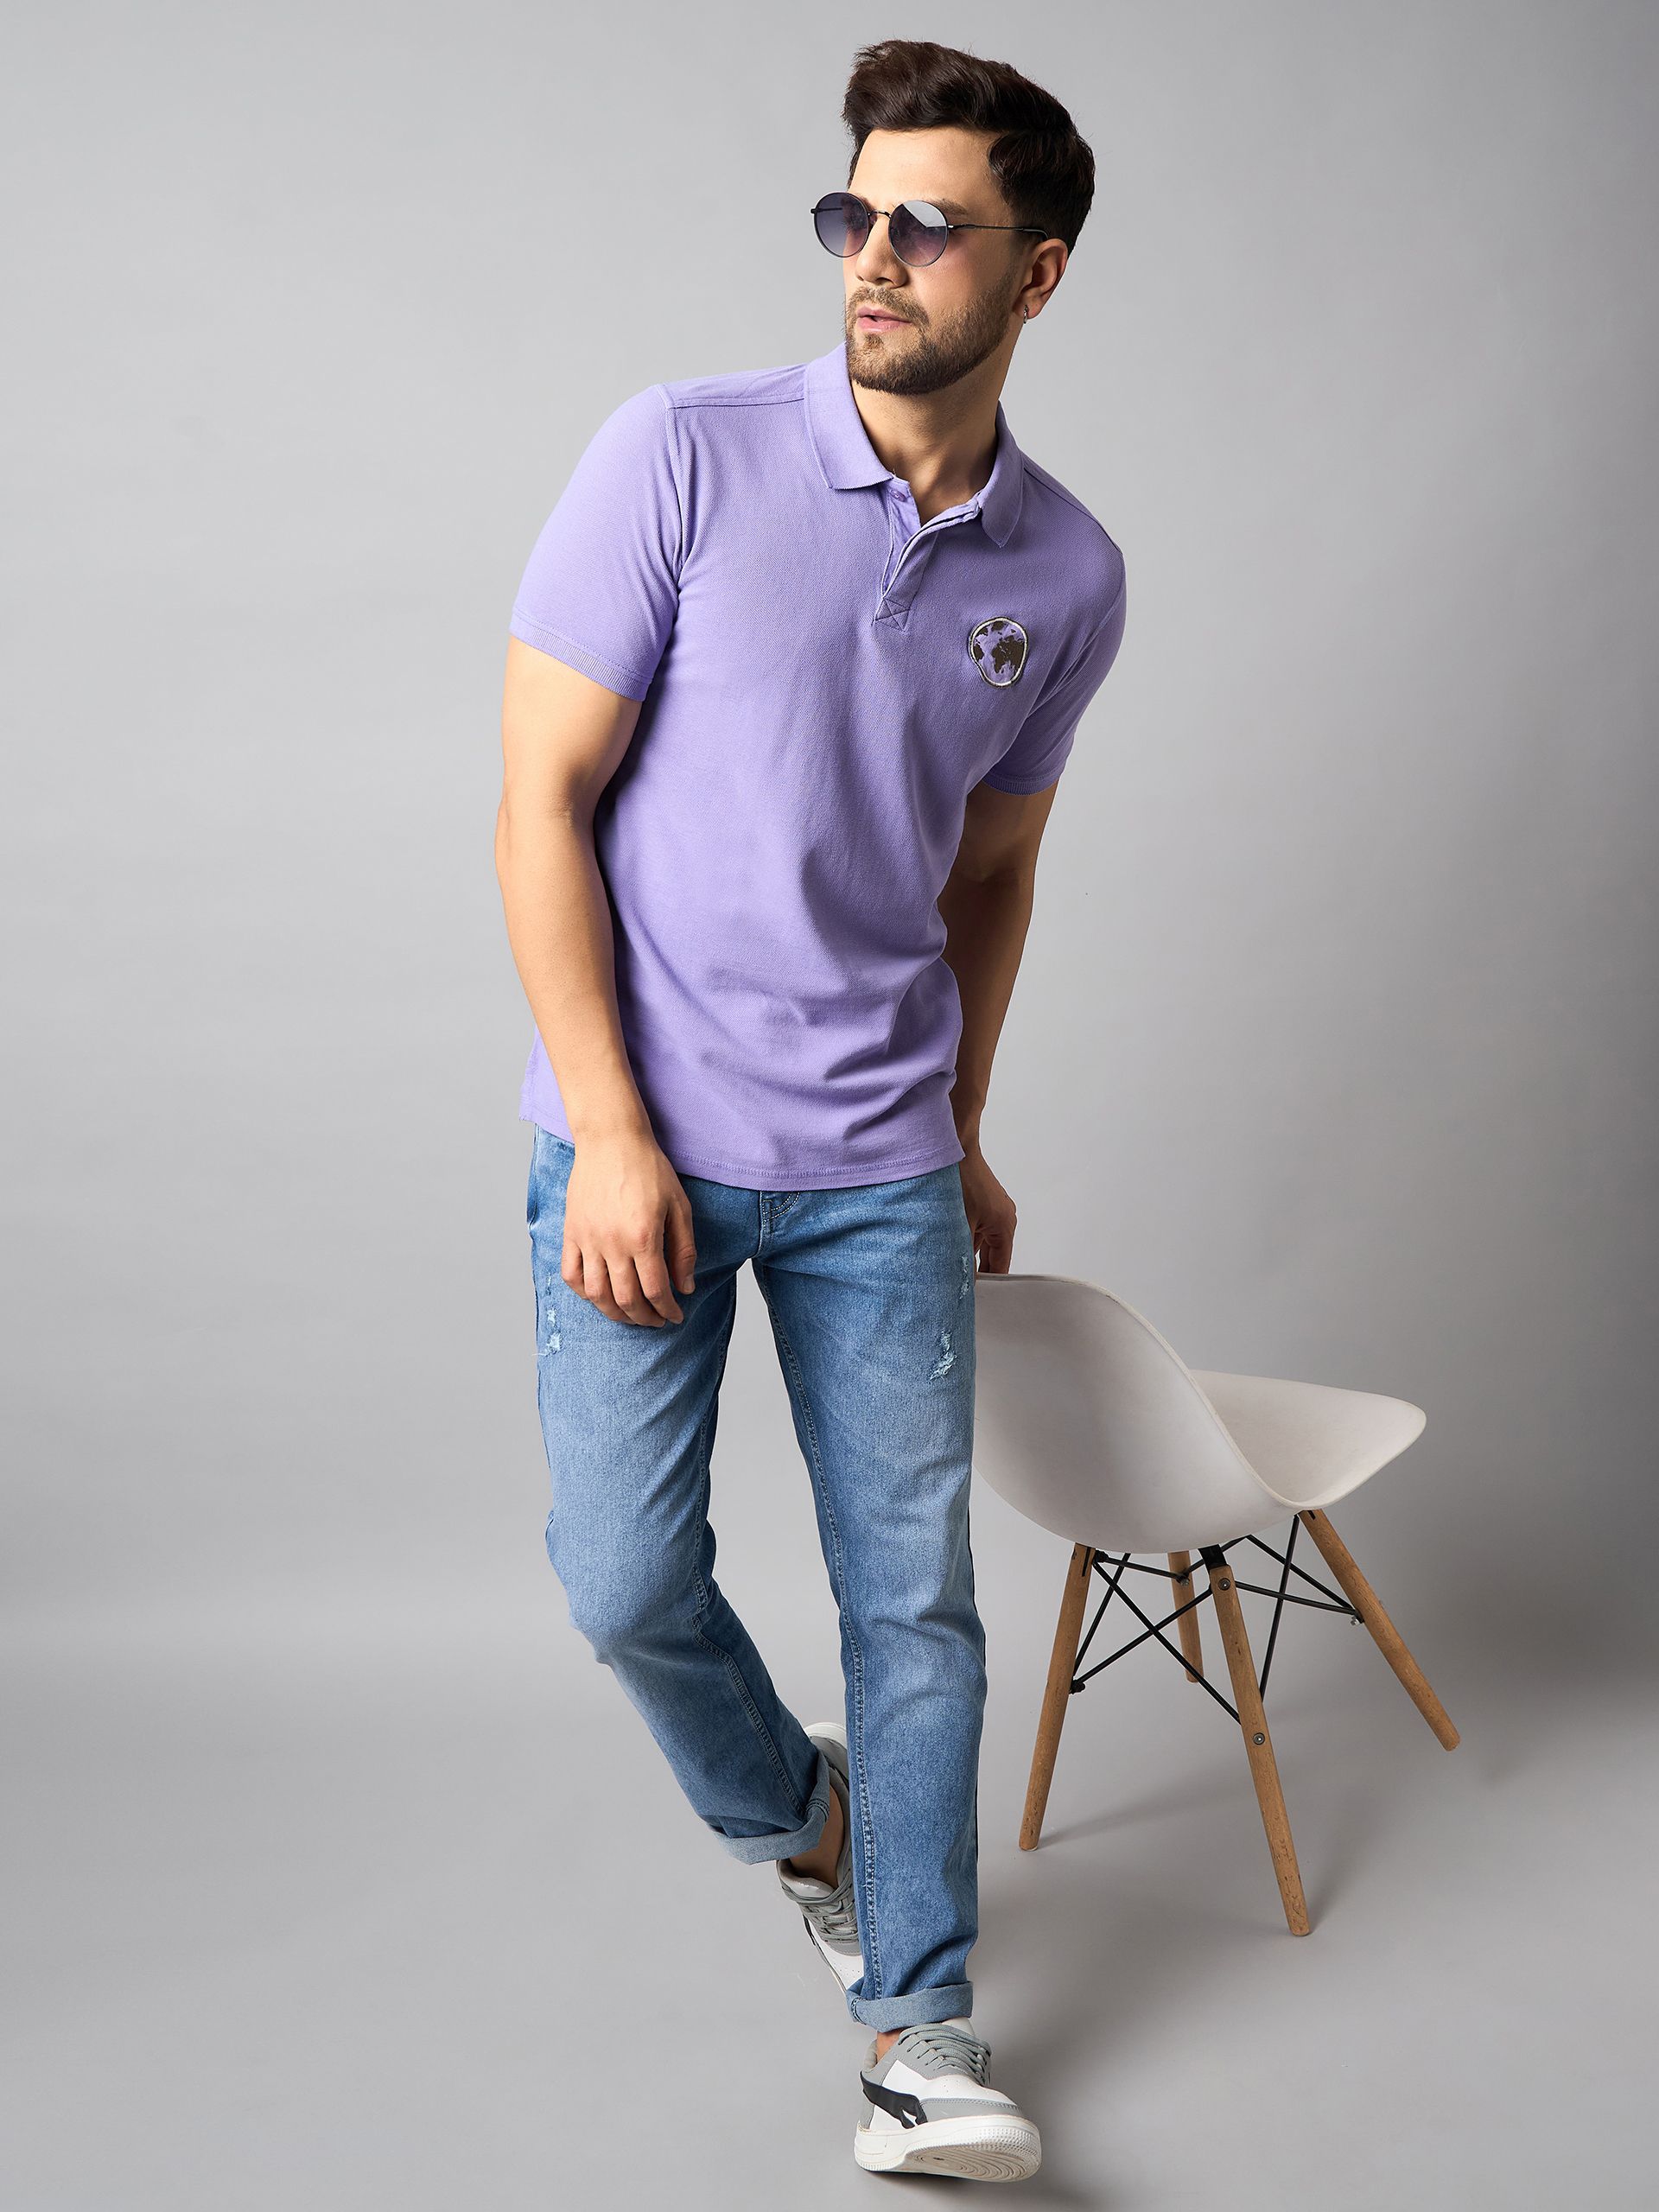     			Club York Cotton Blend Regular Fit Embroidered Half Sleeves Men's Polo T Shirt - Purple ( Pack of 1 )